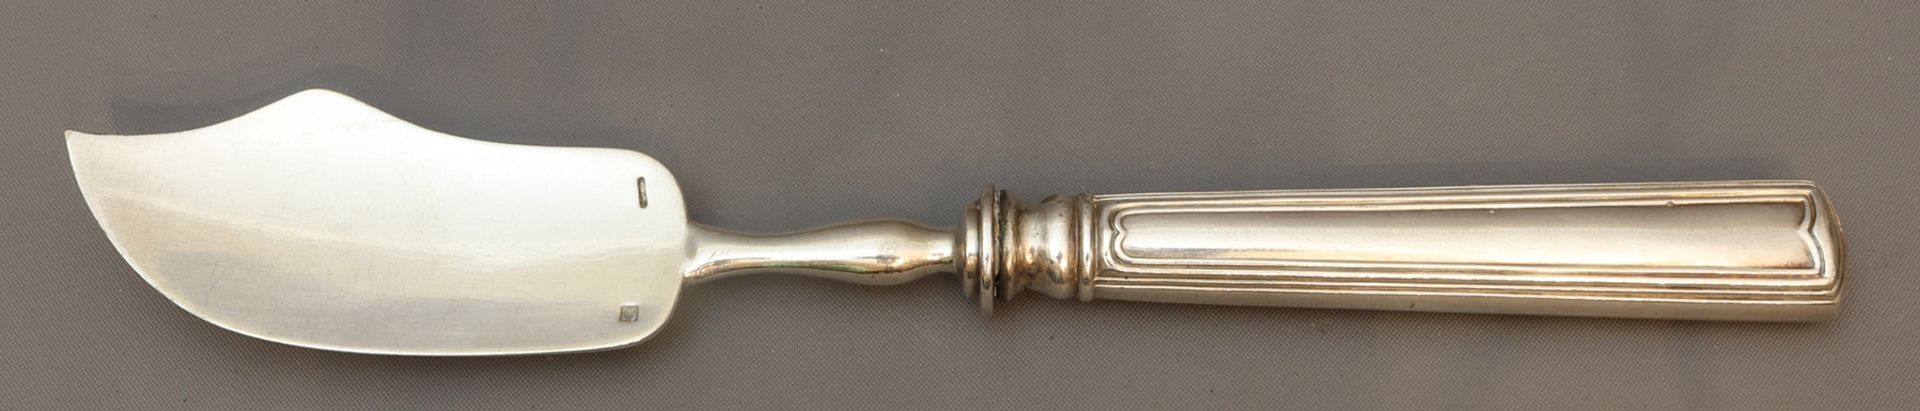 Cake lifter and cake knife, Historicism circa 1900, German - Image 4 of 5